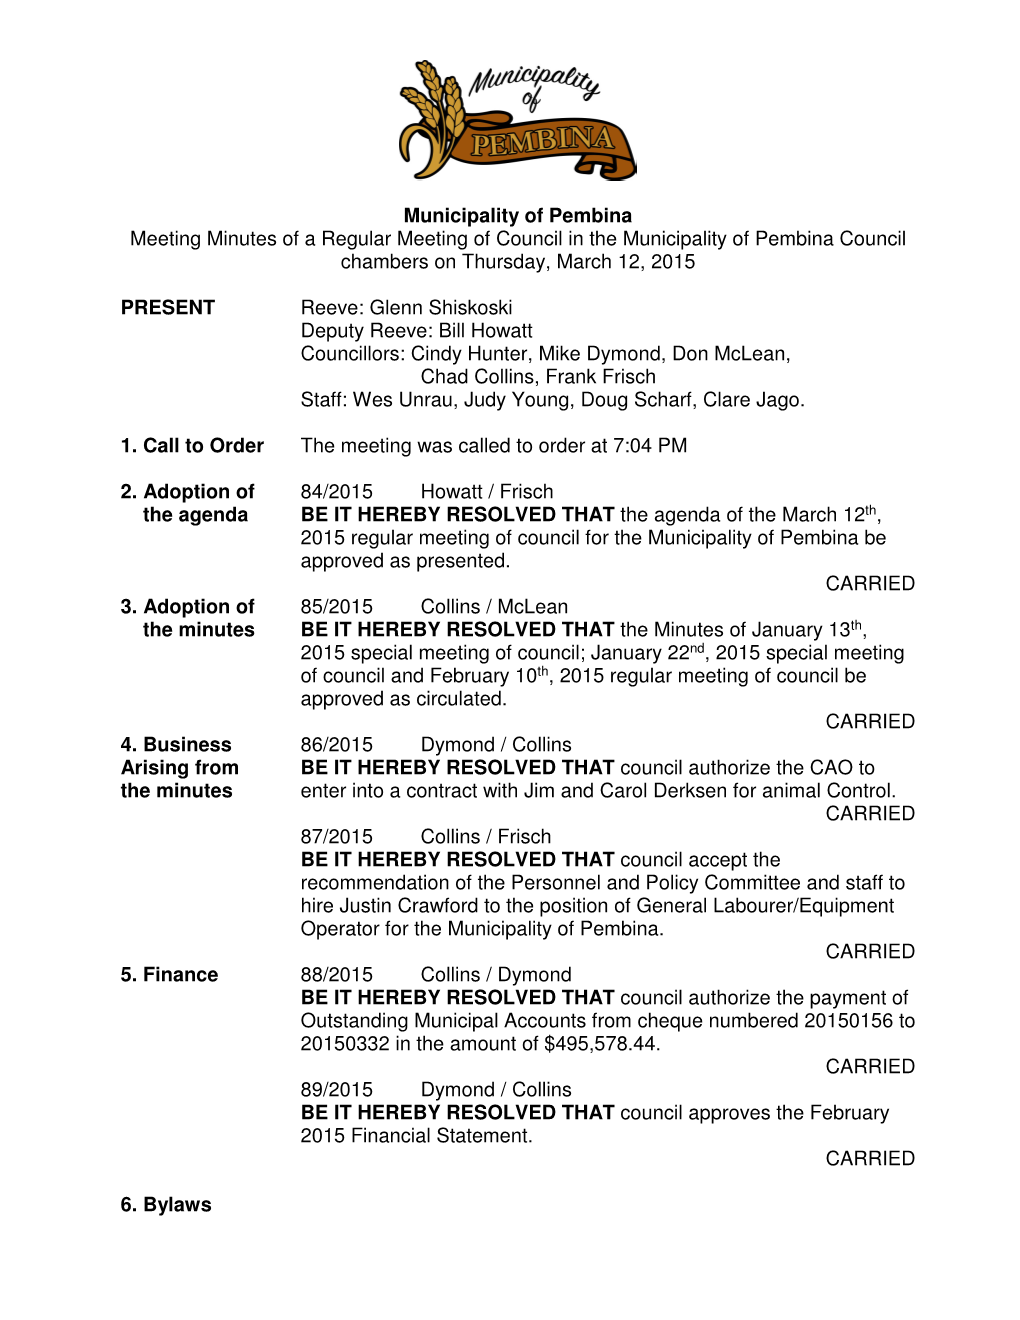 Municipality of Pembina Meeting Minutes of a Regular Meeting of Council in the Municipality of Pembina Council Chambers on Thursday, March 12, 2015